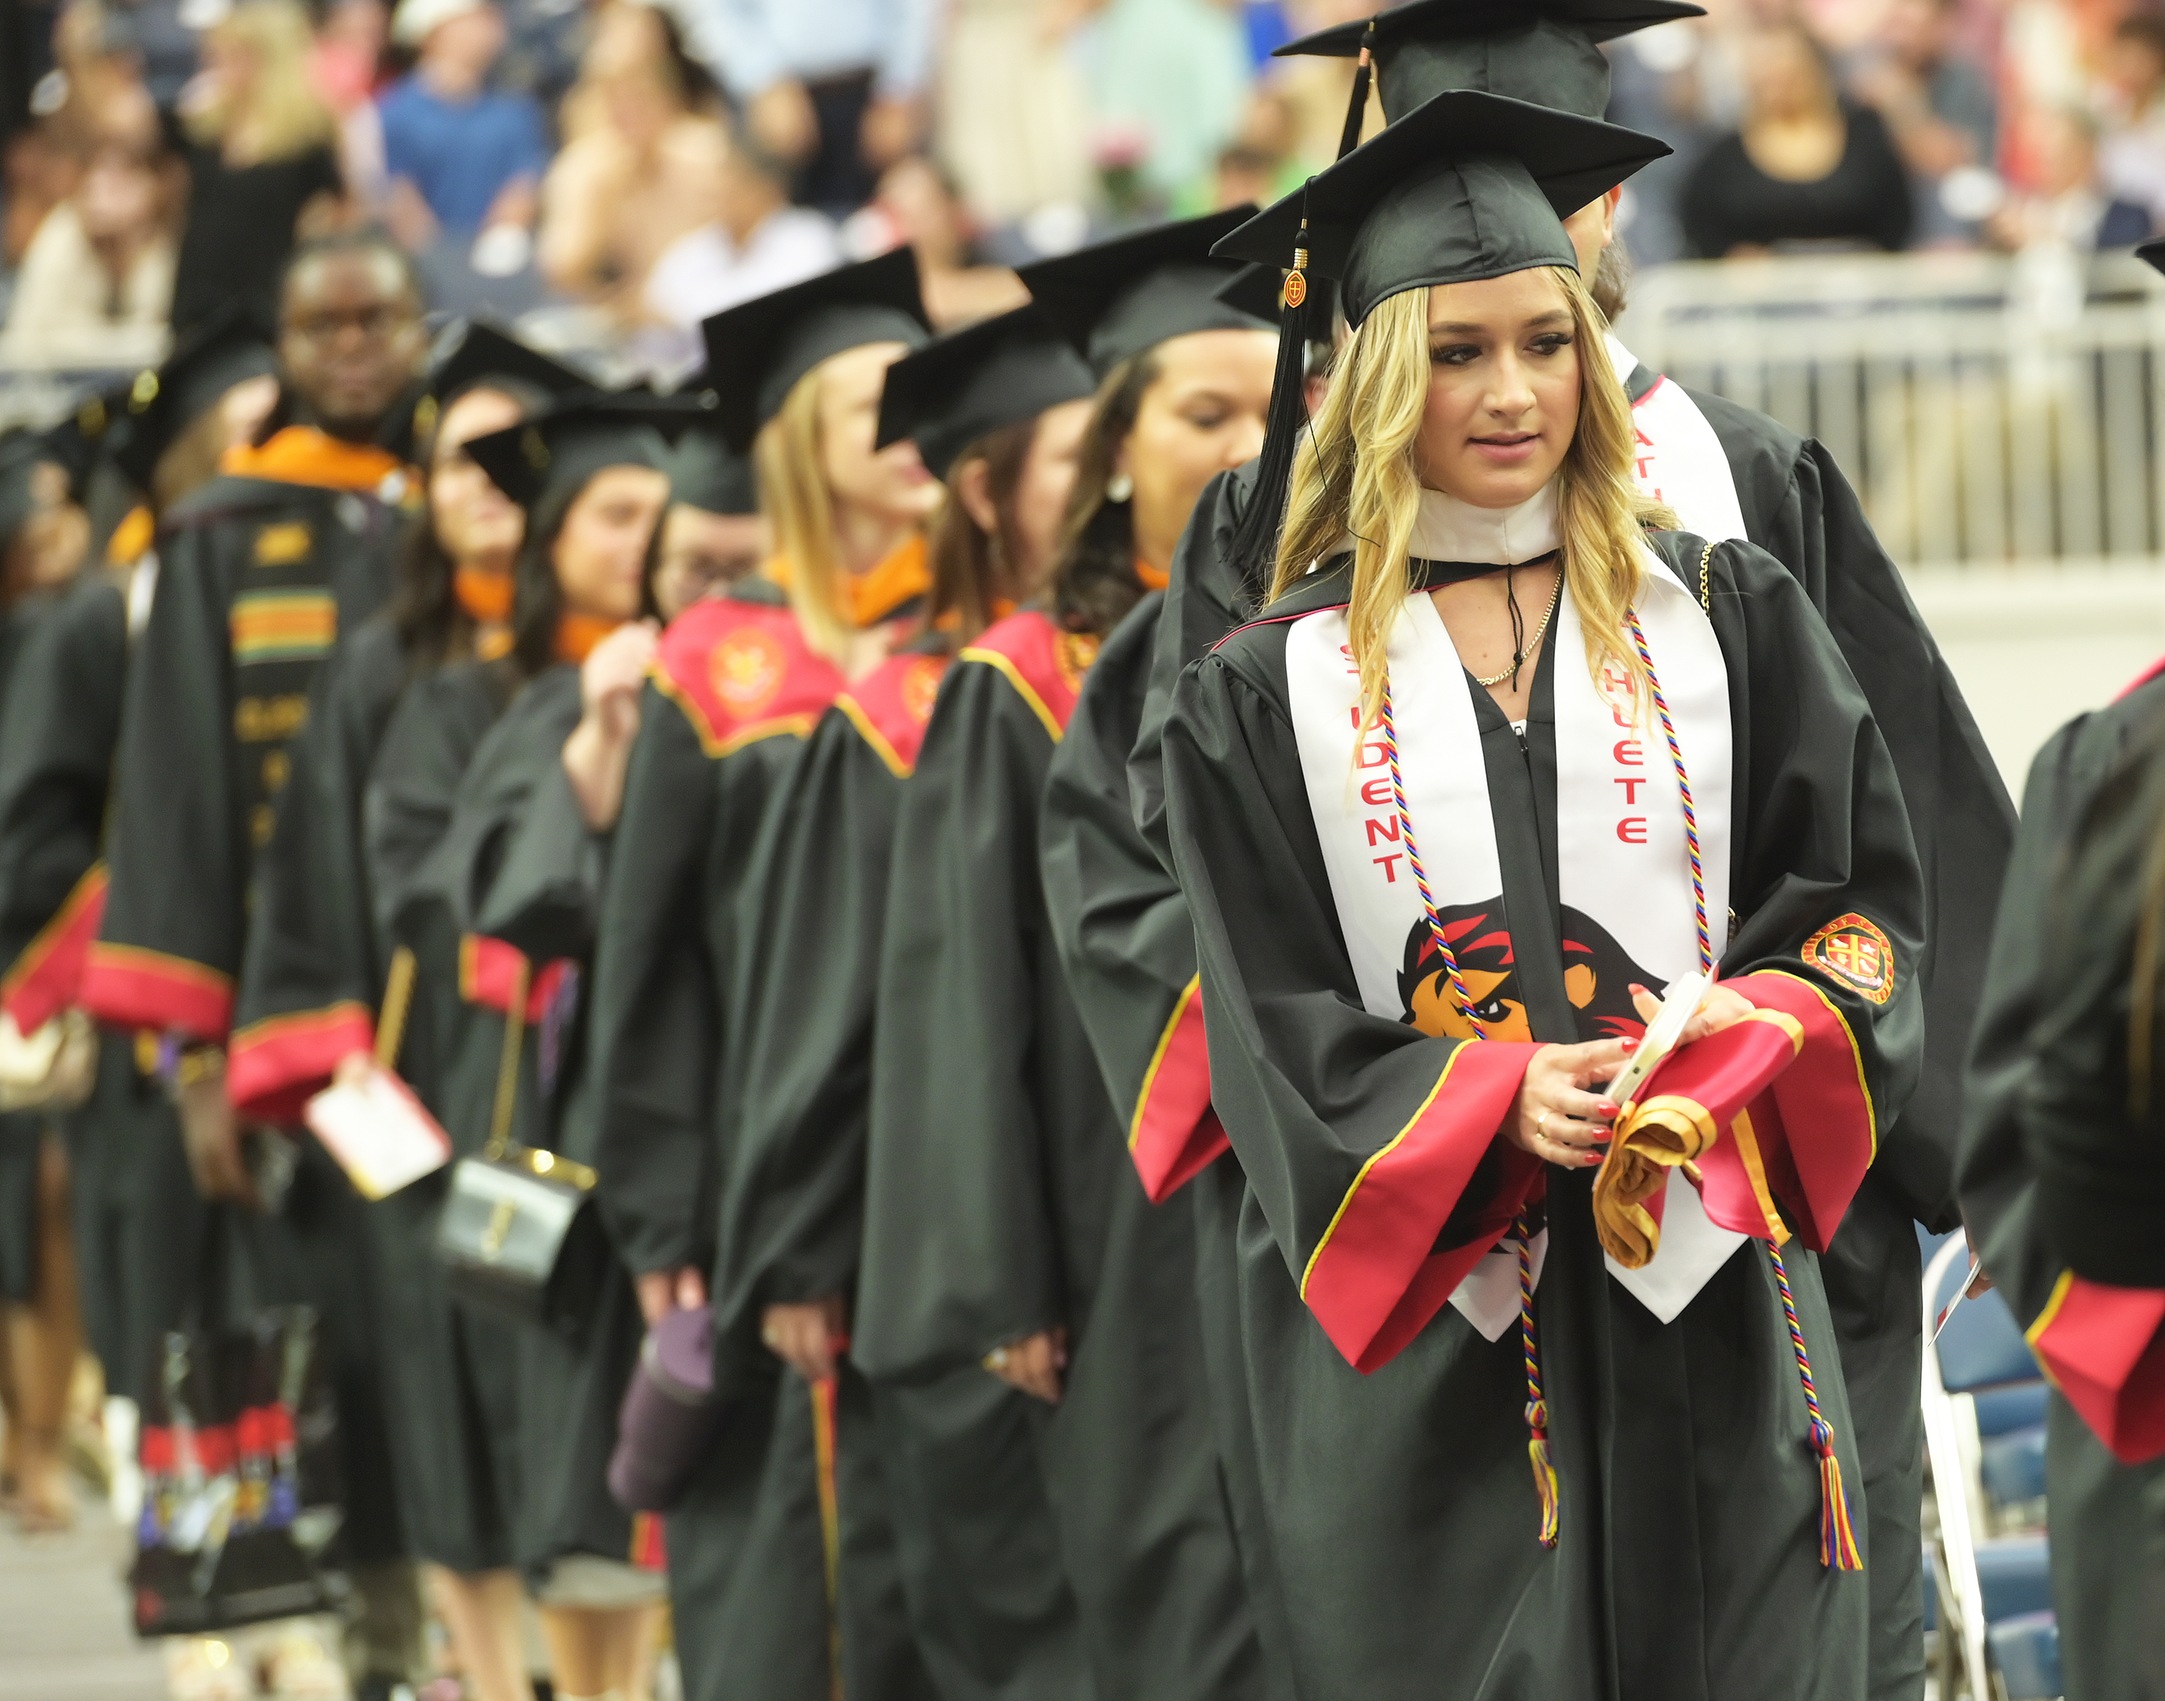 47 Celt Student-Athletes Walk the Stage at Commencement